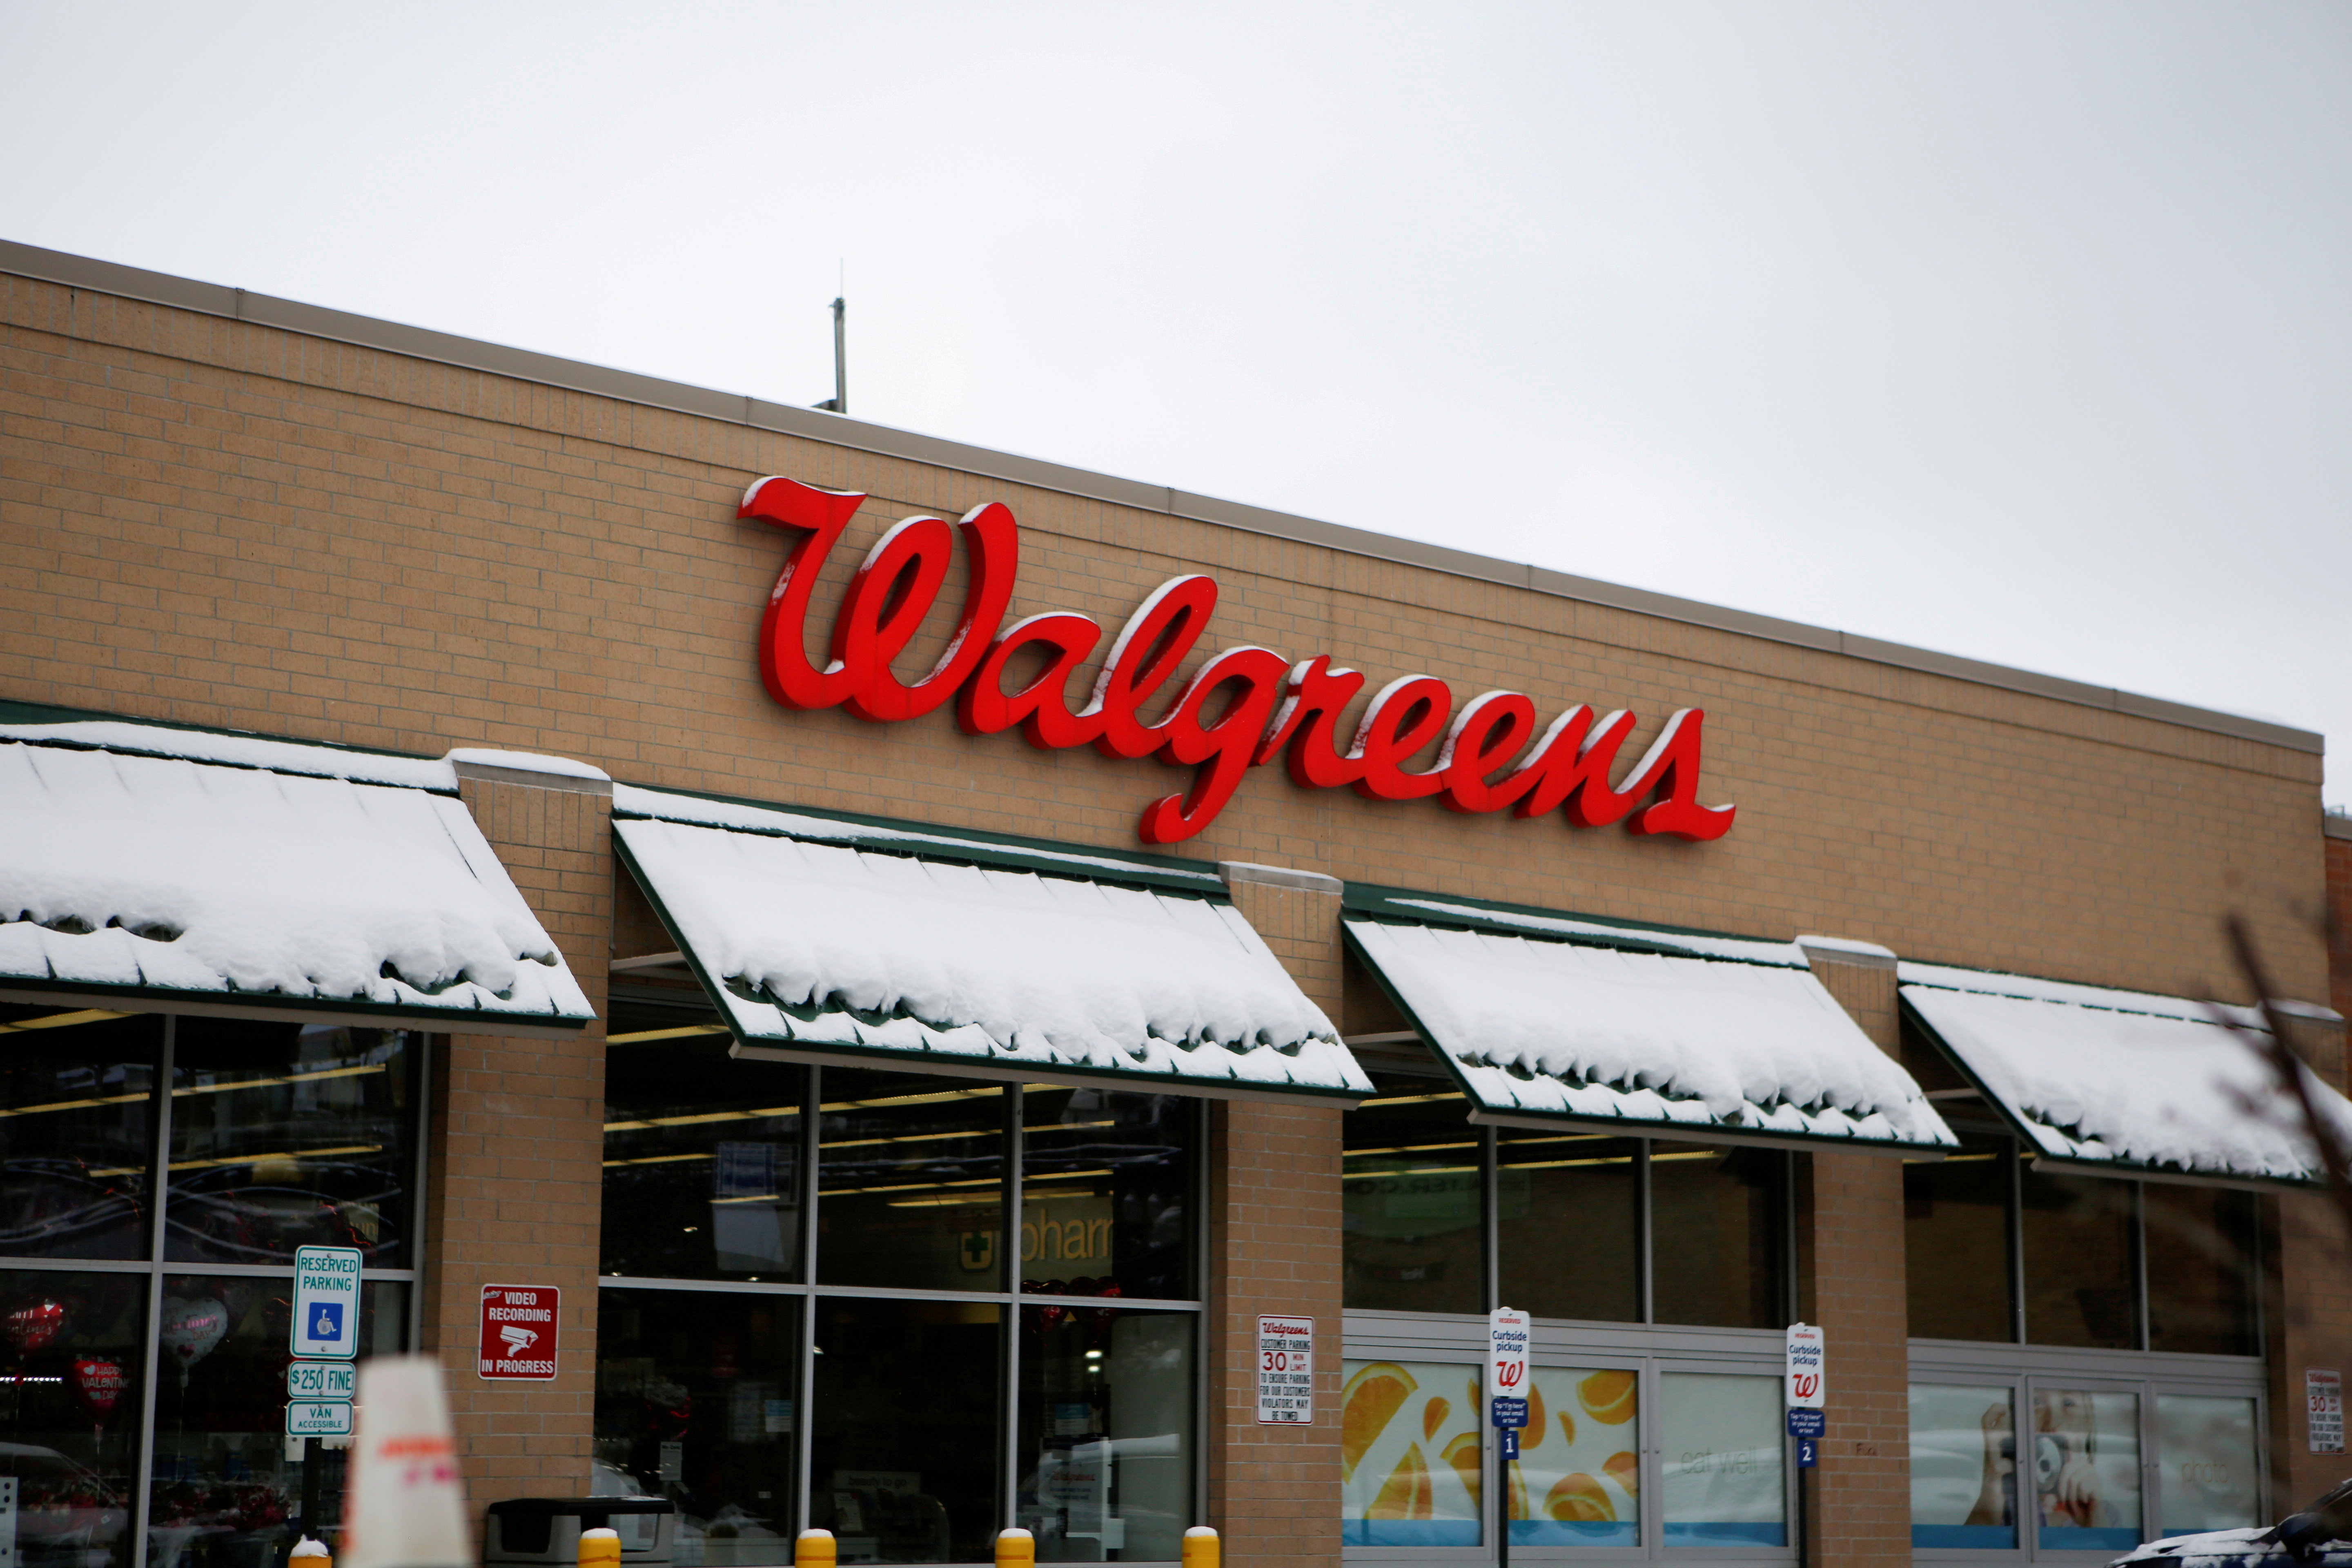 A Walgreens store is seen in Chicago, Illinois, U.S. February 11, 2021. REUTERS/Eileen T. Meslar